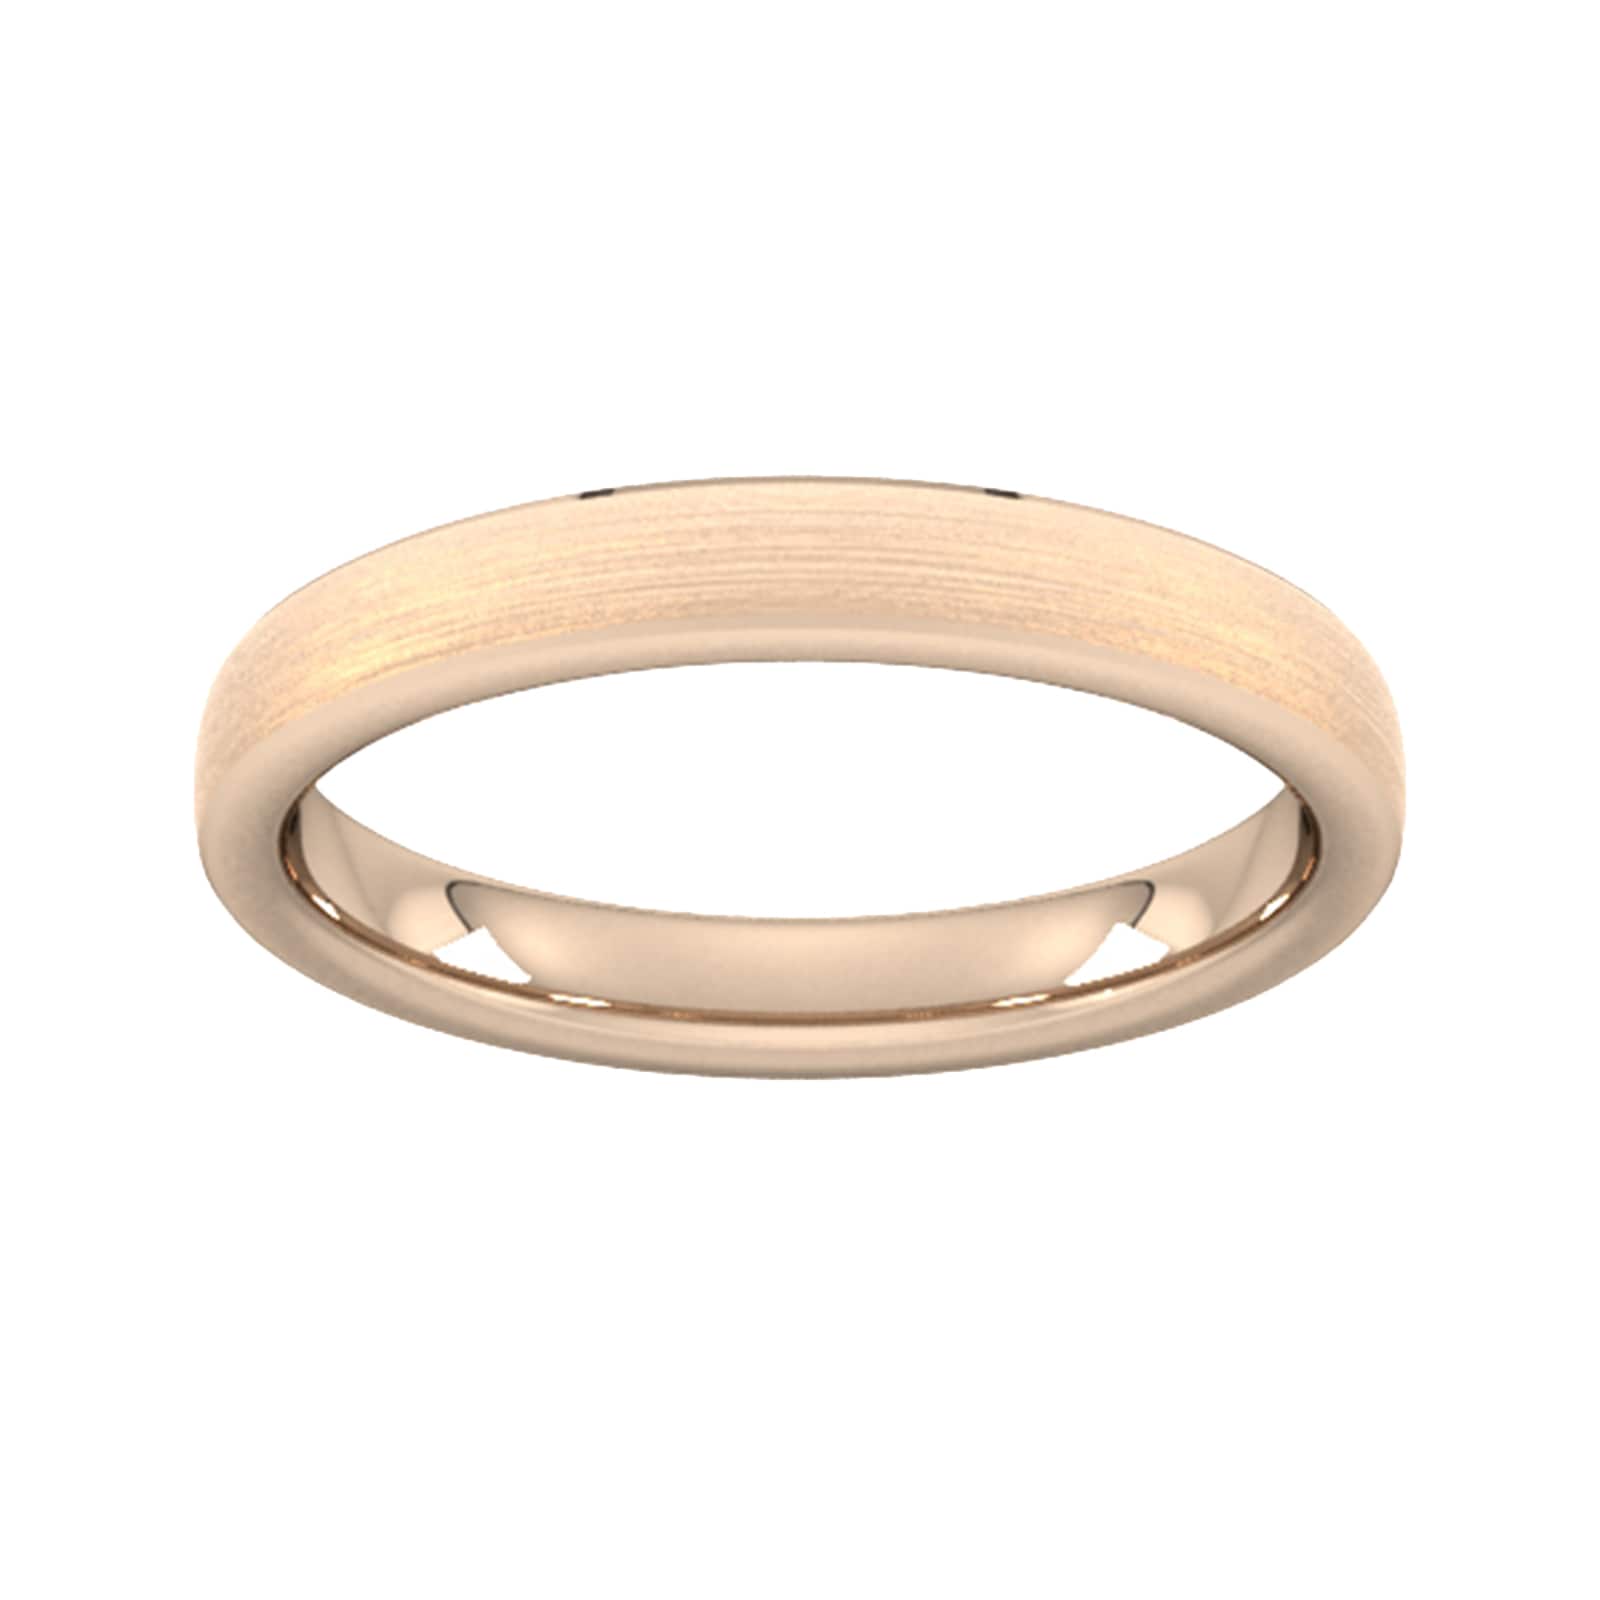 3mm Traditional Court Heavy Polished Chamfered Edges With Matt Centre Wedding Ring In 18 Carat Rose Gold - Ring Size O